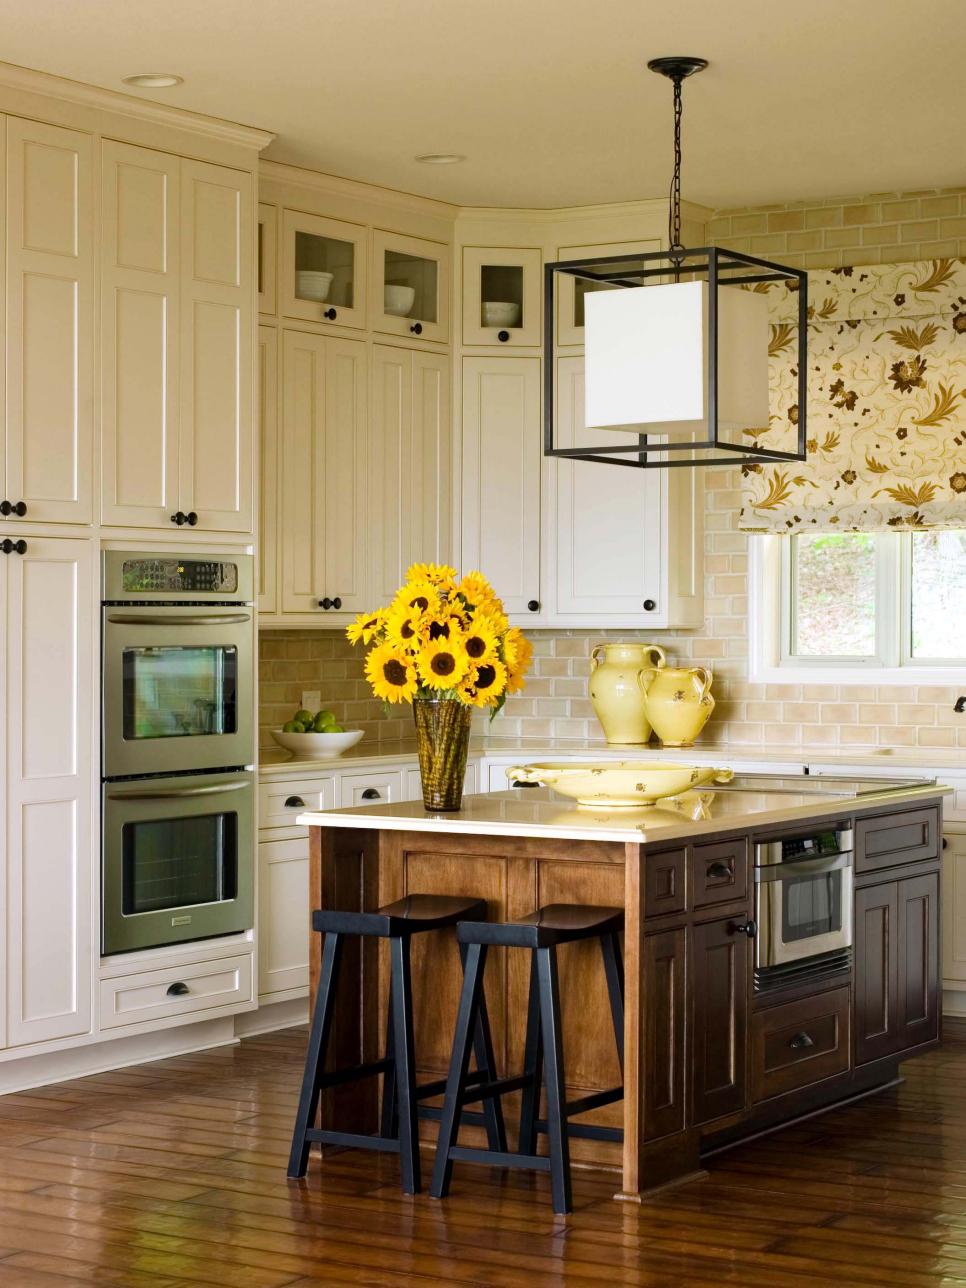 Kitchen Cabinets Should You Replace Or Reface Hgtv for Reface Old Kitchen Cabinets